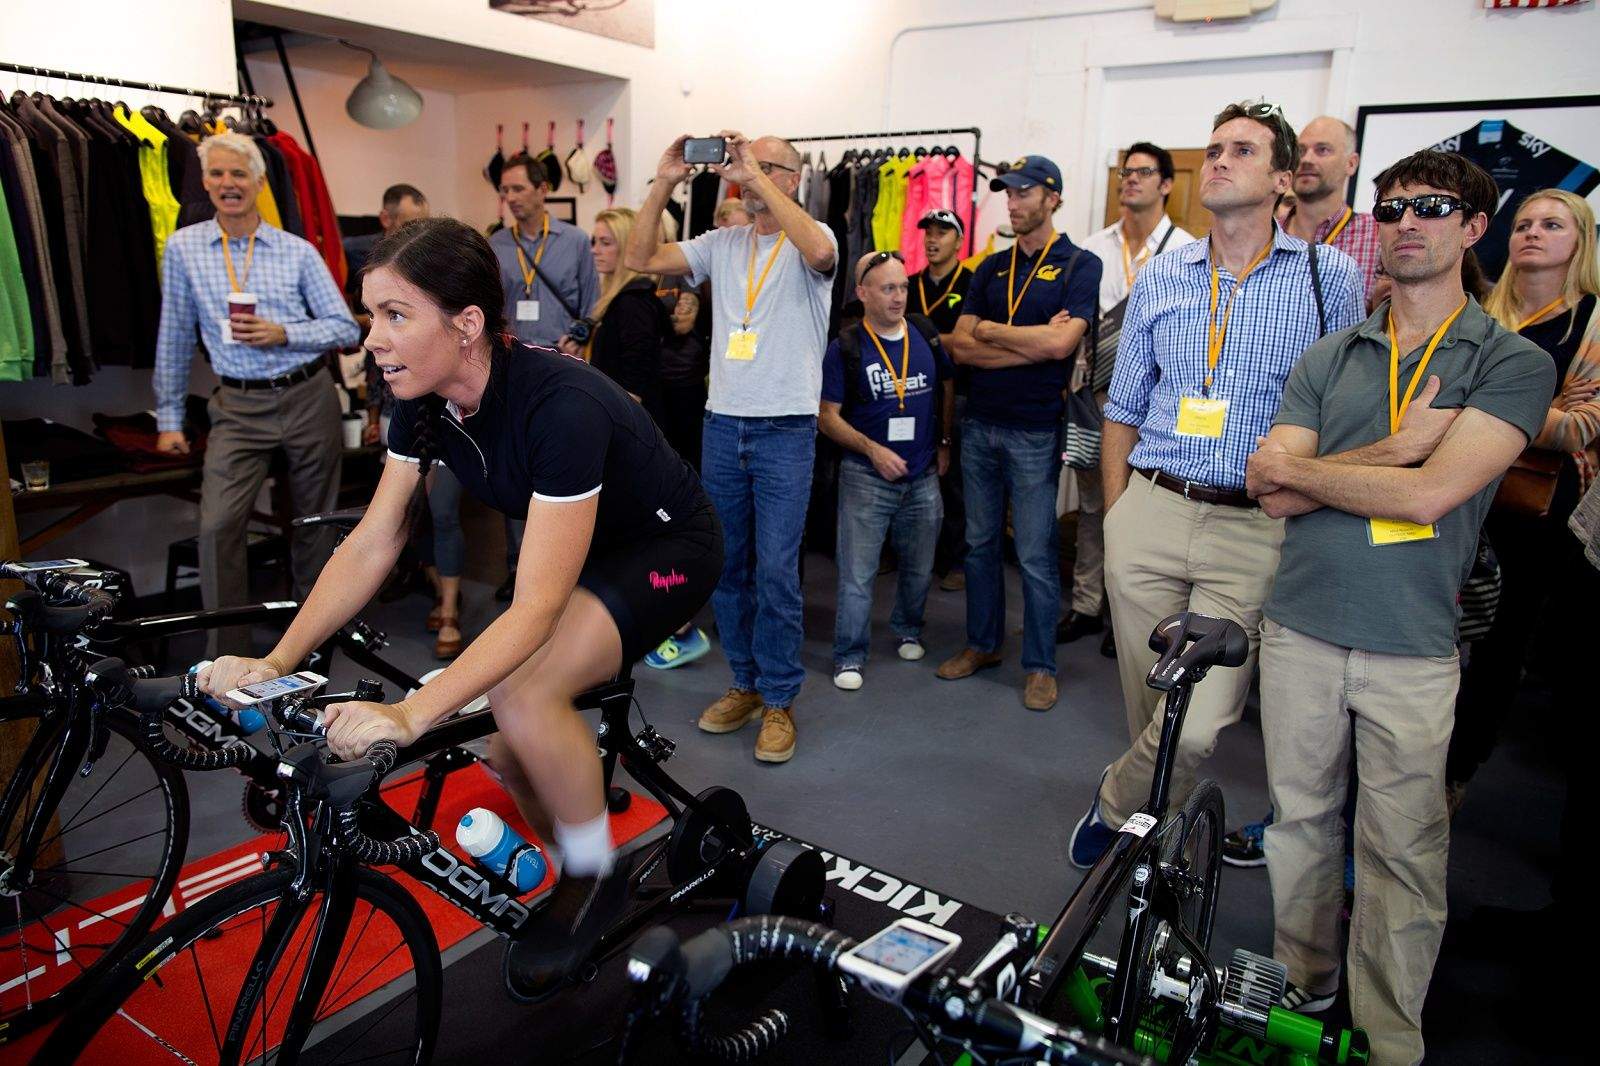 Journalists and bike geeks gather at the Rapha Store in San Francisco for Zwift’s launch in September 2014.